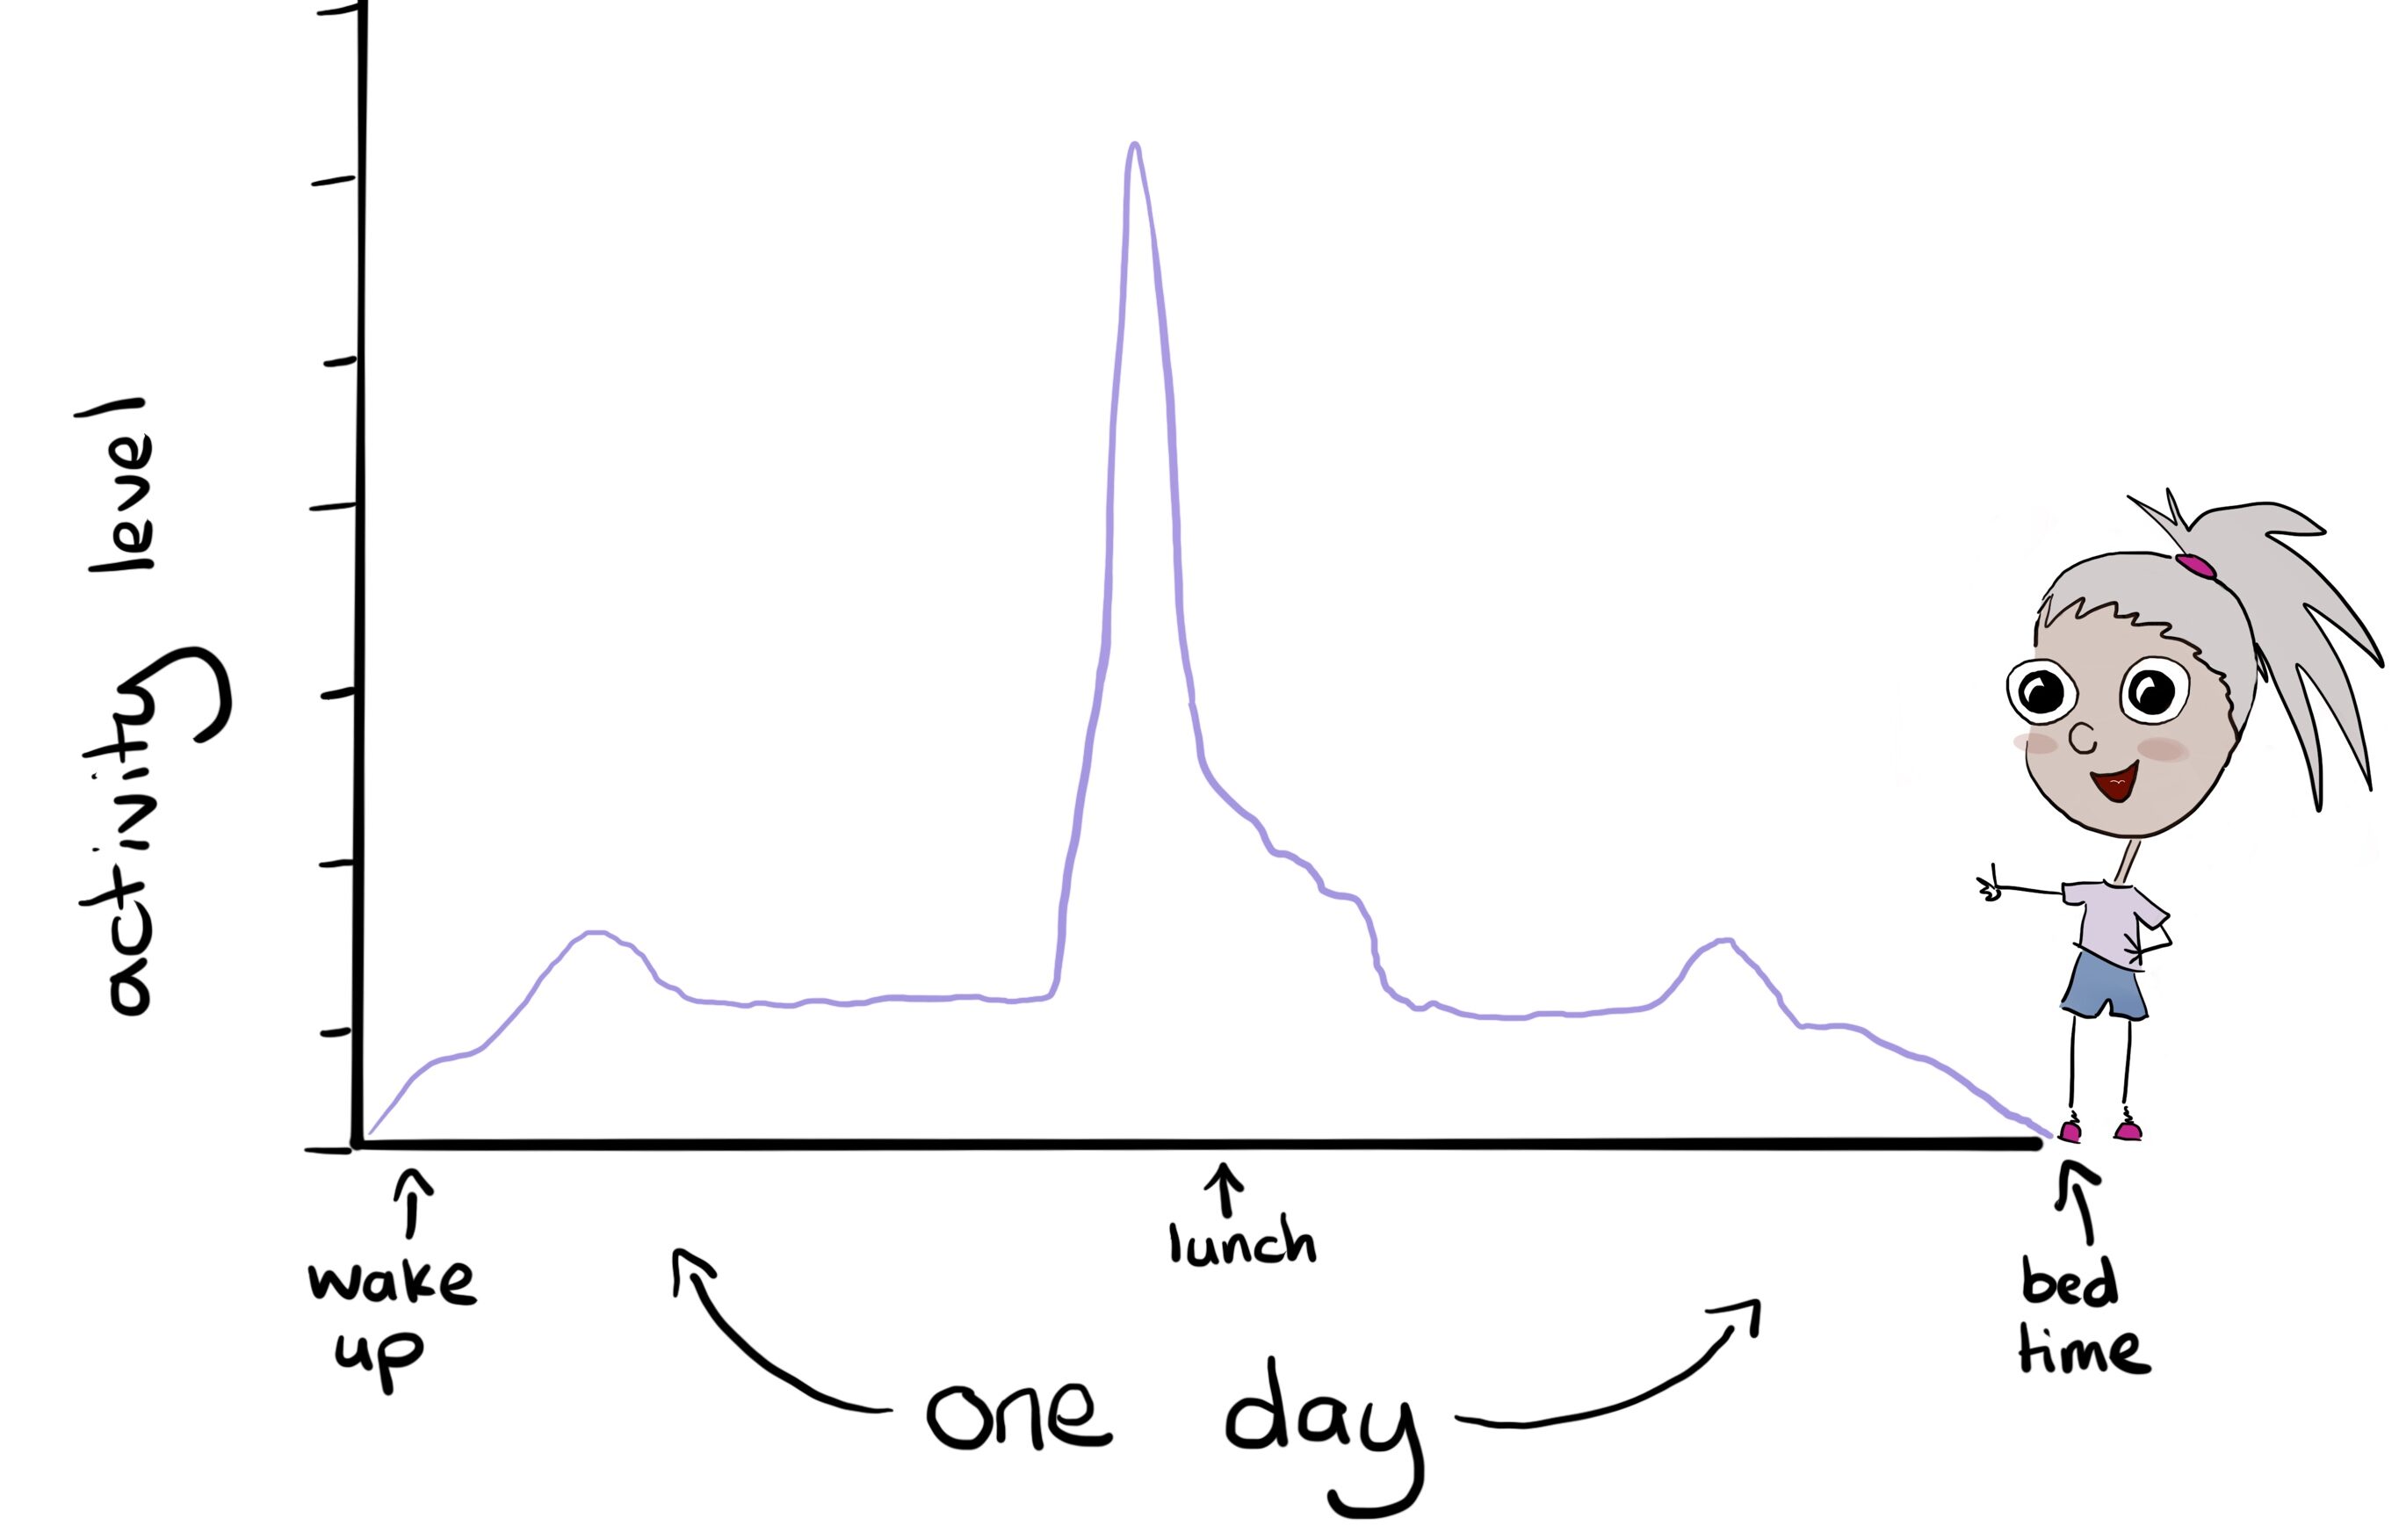 graph showing sedentary active lifestyle over the course of a day